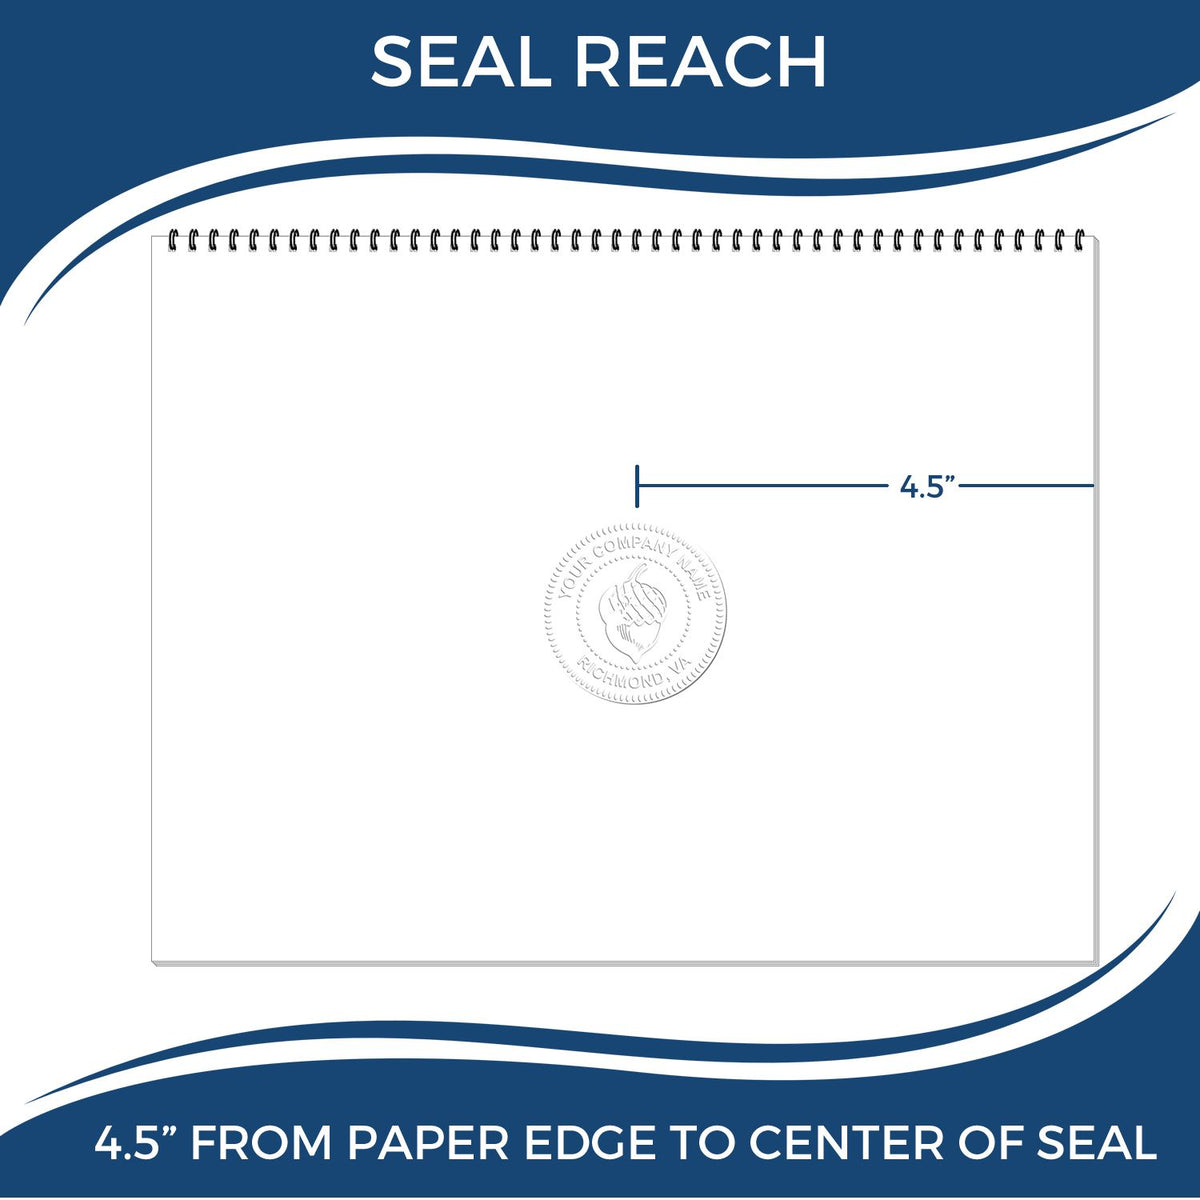 An infographic showing the seal reach which is represented by a ruler and a miniature seal image of the Extended Long Reach Kentucky Architect Seal Embosser